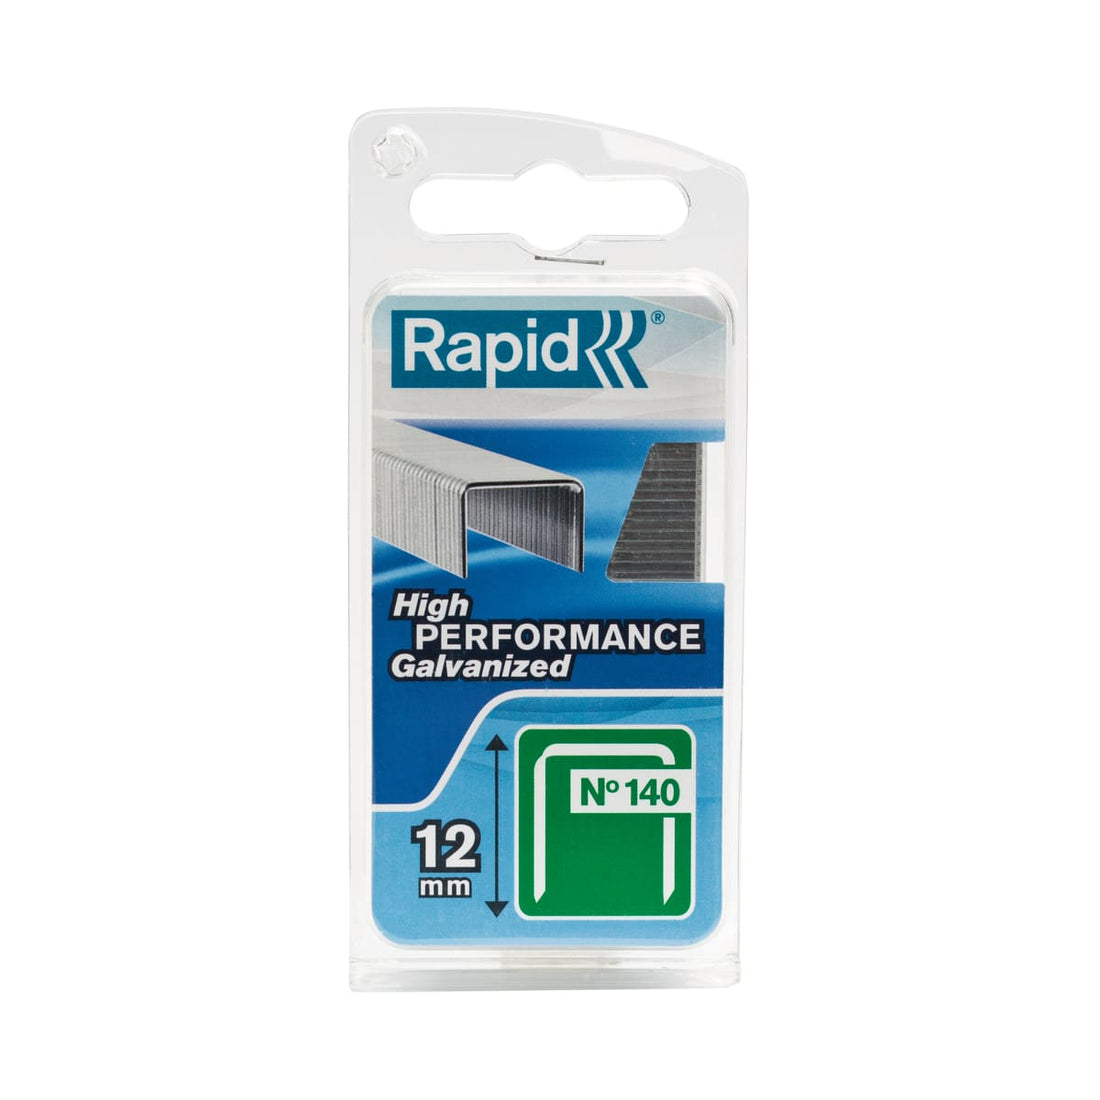 RAPID FLAT WIRE STAPLES NO. 140/12MM GALVANISED WIRE, 640 PCS.